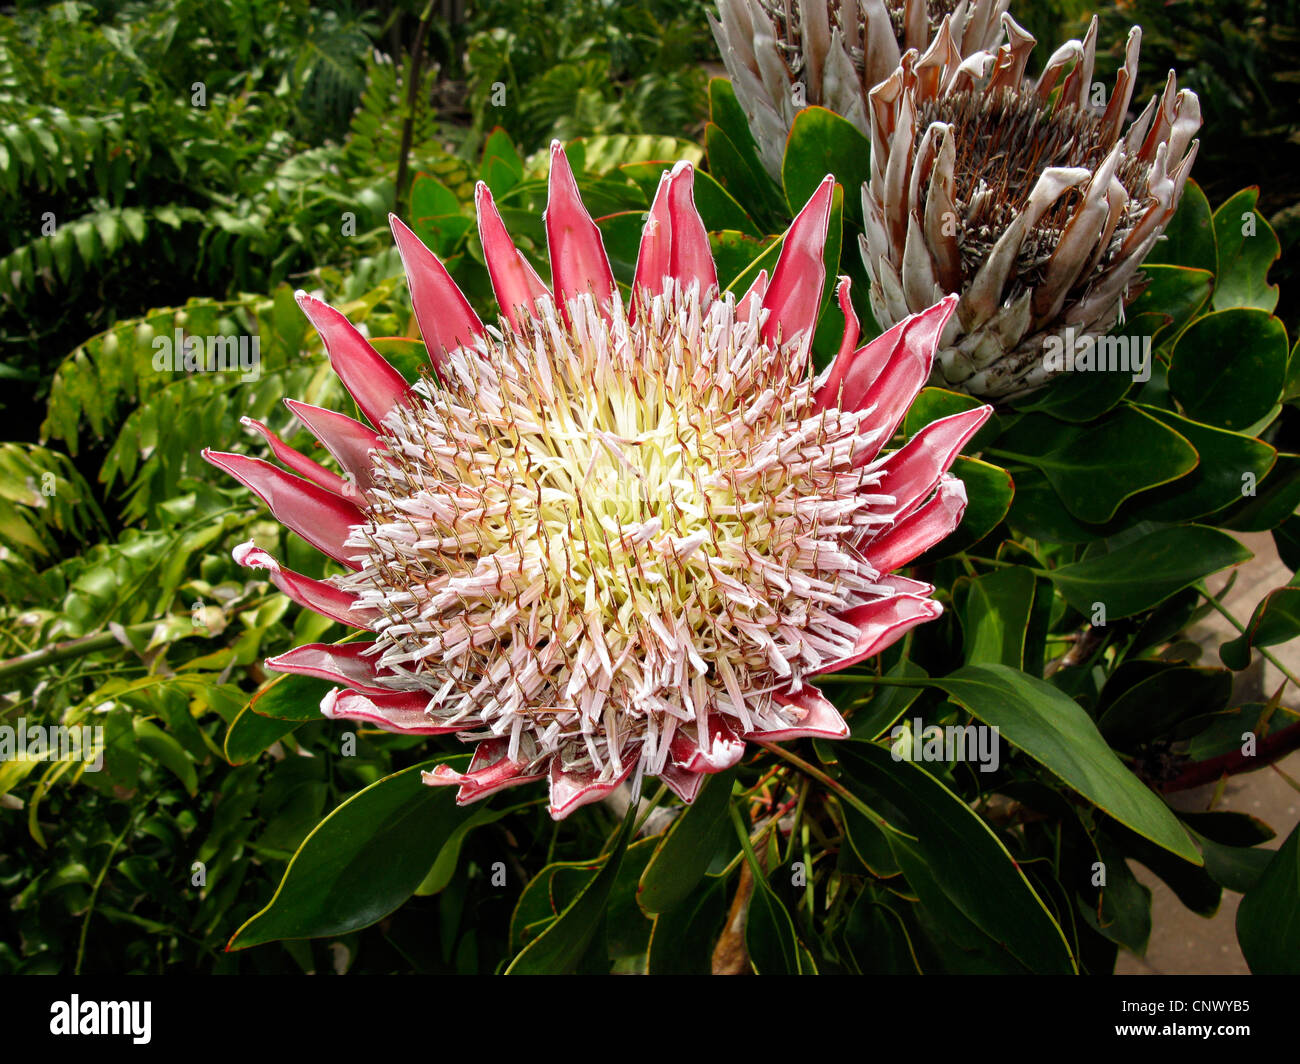 King Protea (Protea cynaroides), blooming, national flower of South Africa Stock Photo